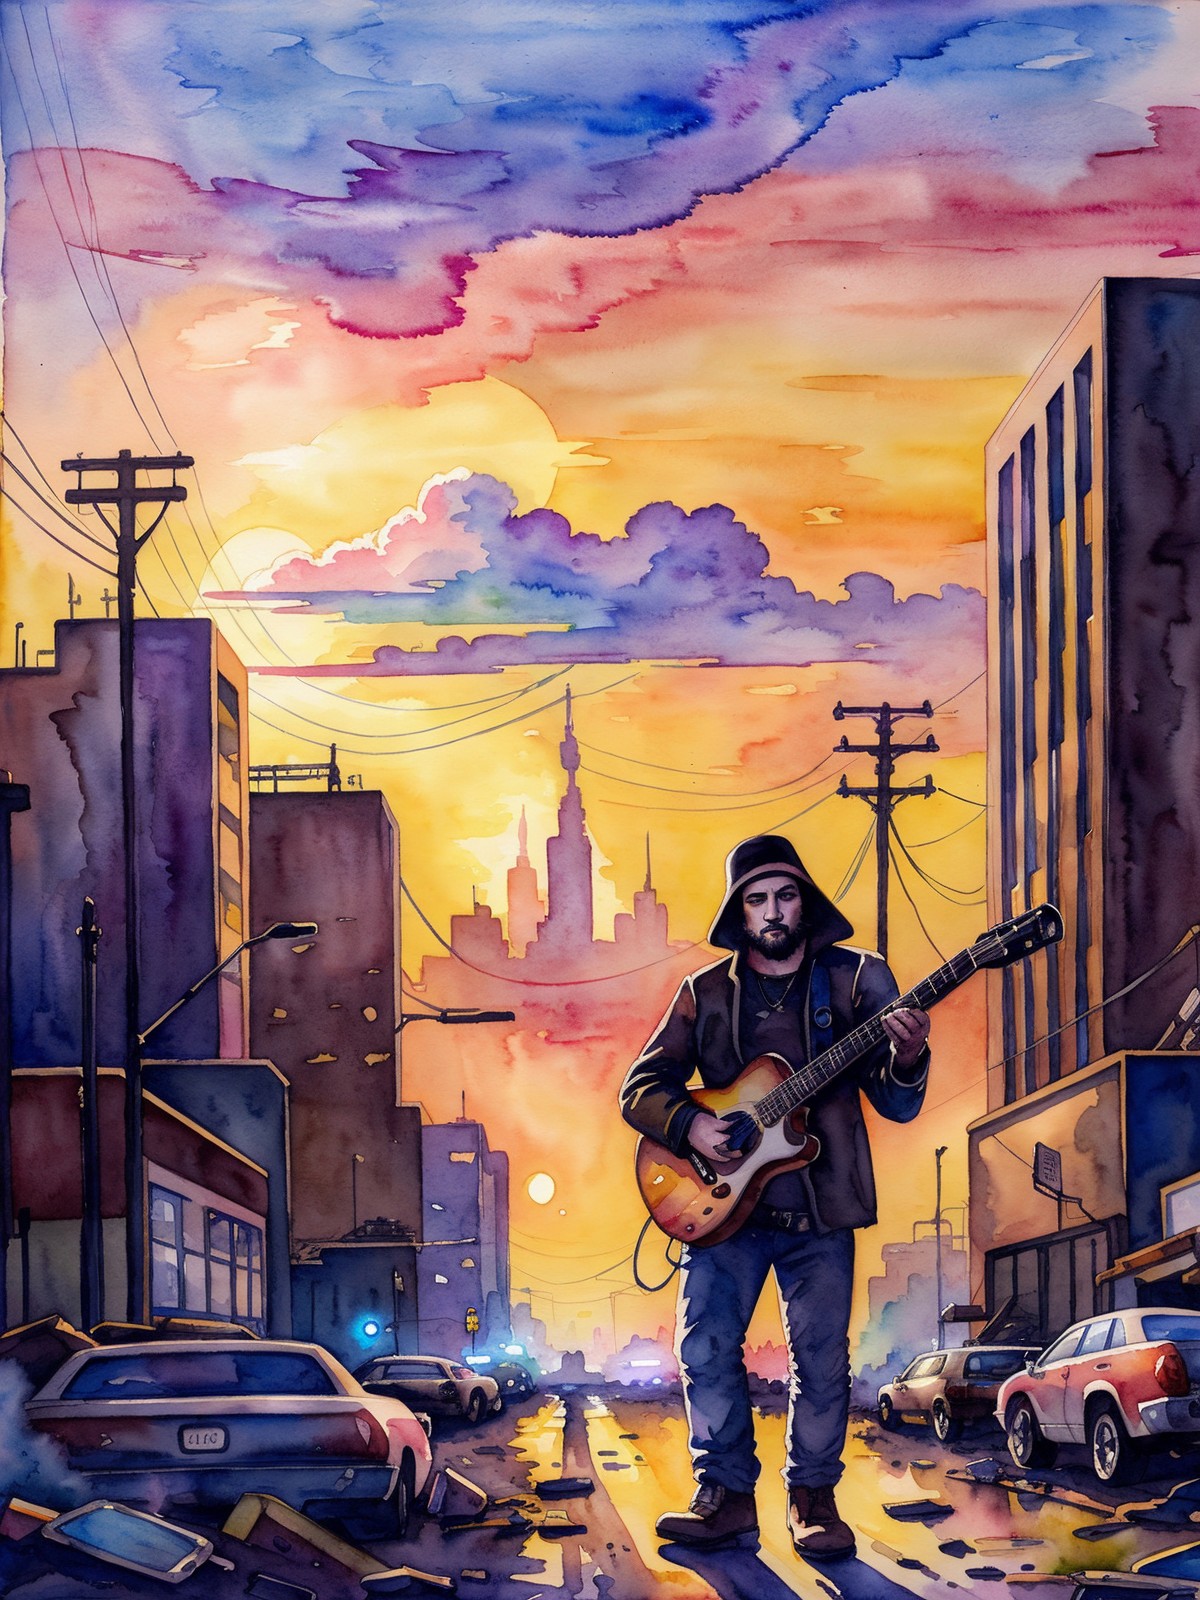 Watercolor painting A black metal guy plays his guitar on the last day on earth , post-apocalyptic destroyed city backgrou...